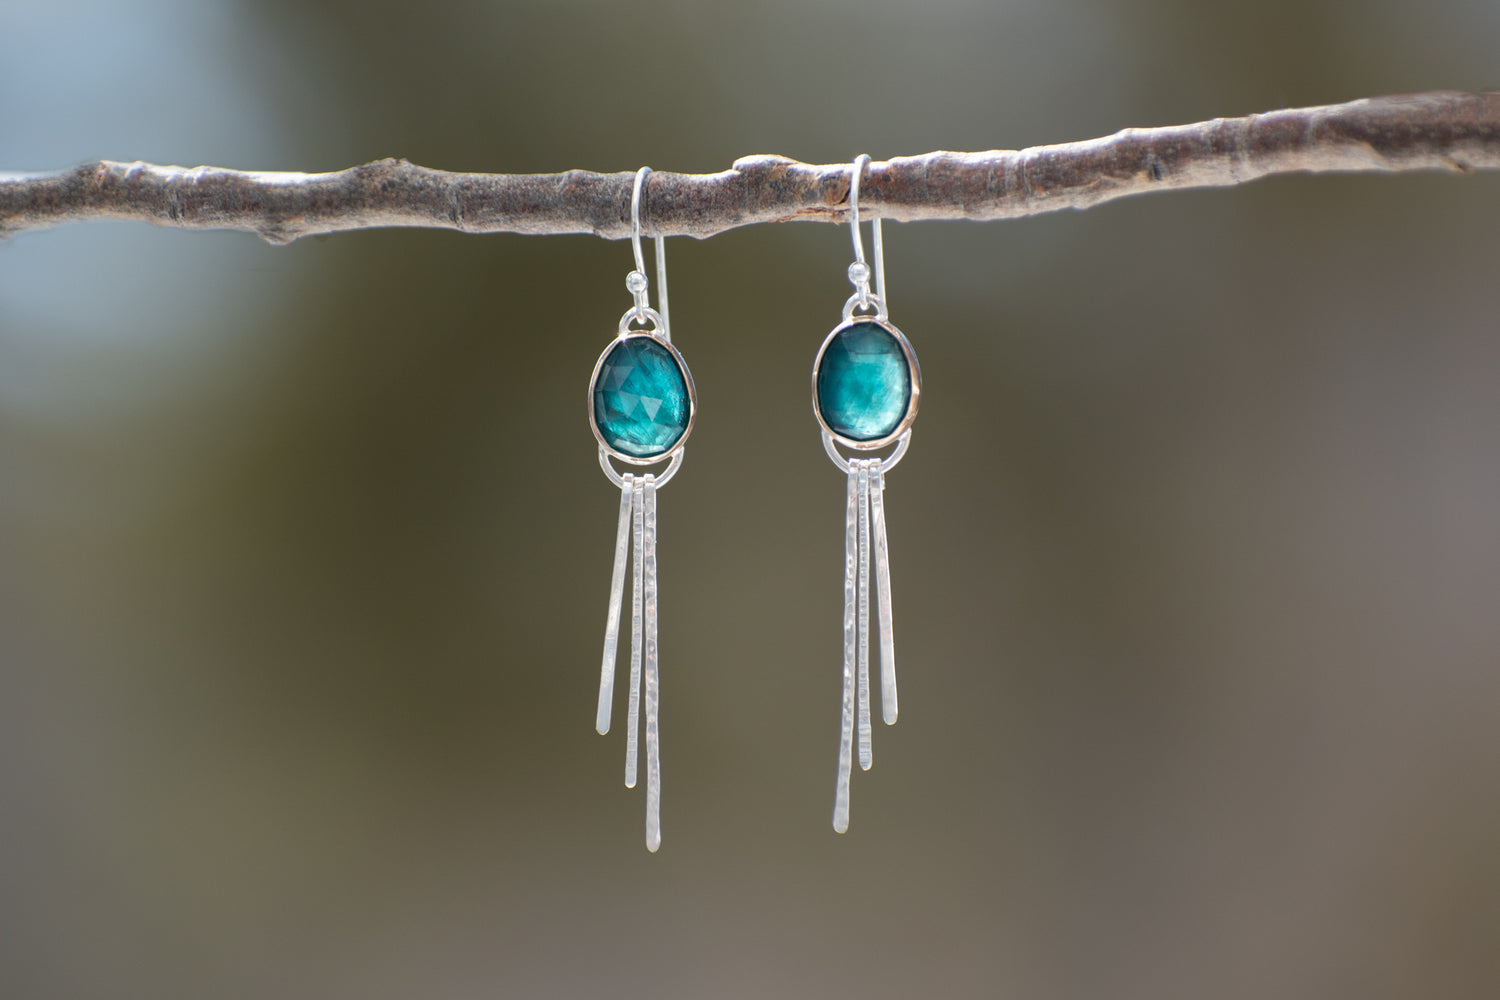 Earrings of The Teton Collection